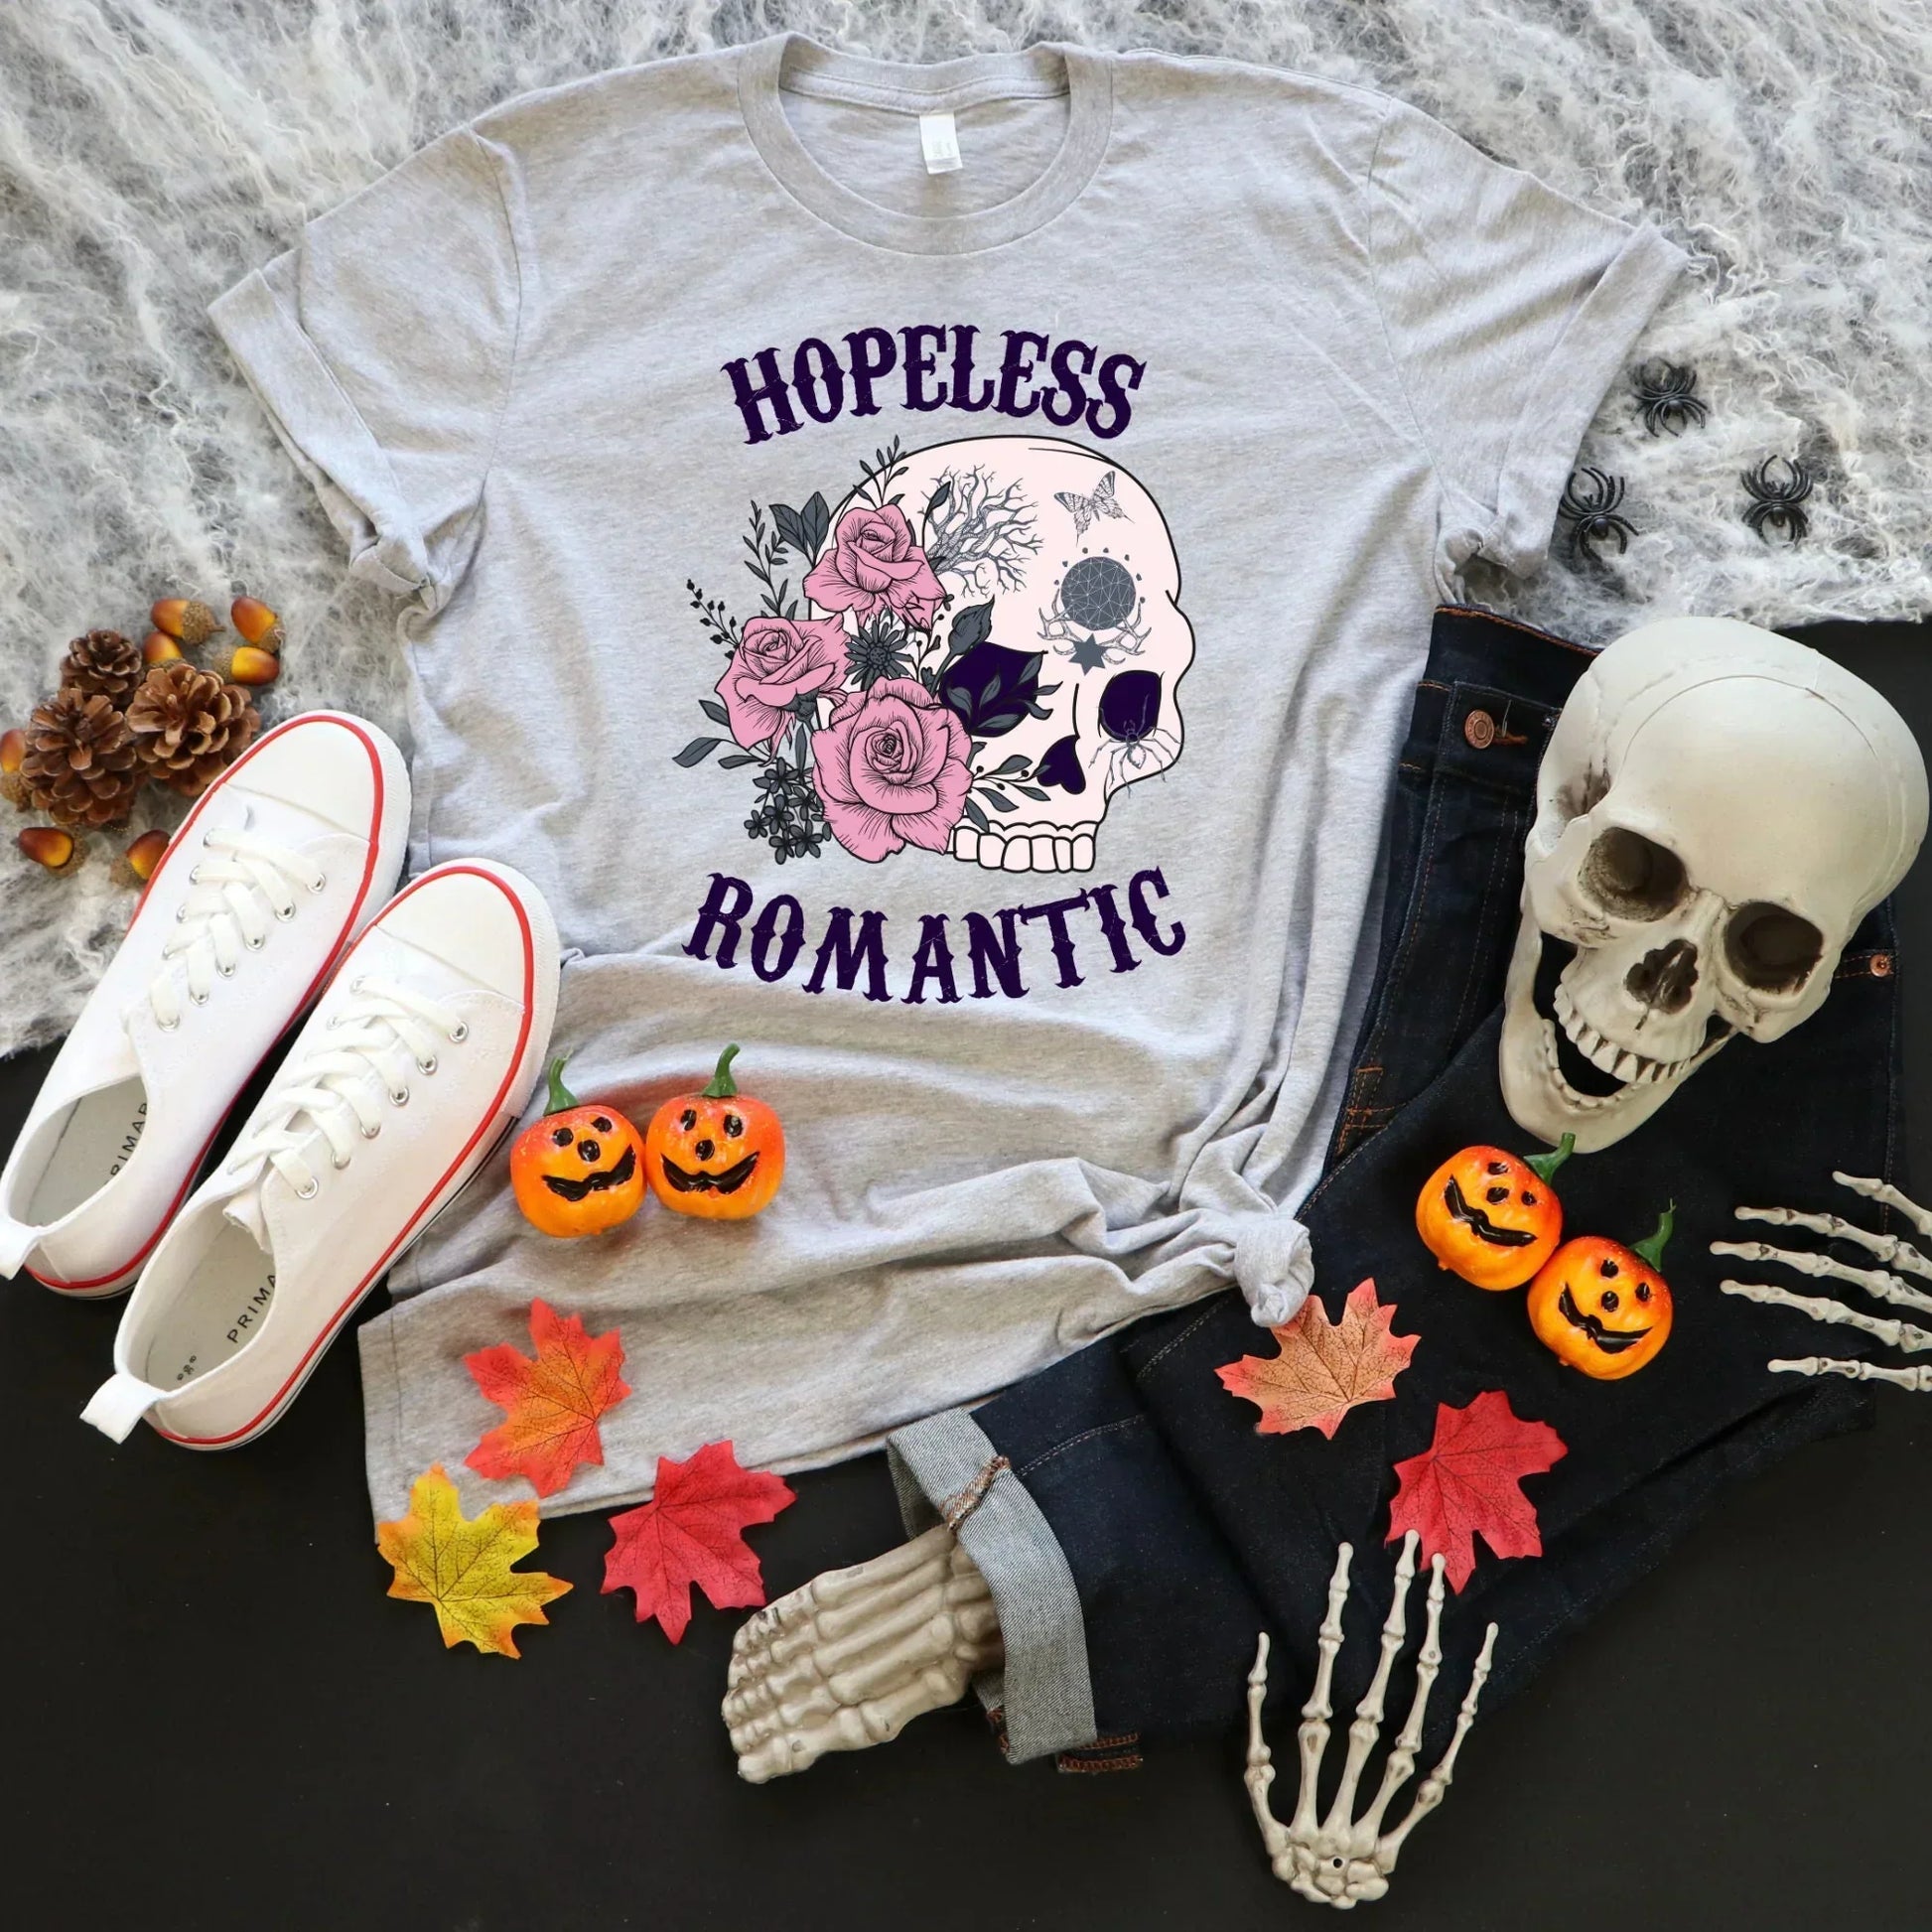 Gothic Shirt, Pastel Halloween Sweatshirt, Witchy Vibes, Skull Shirt Dead Roses Shirt, Magical Witch Shirt, Pastel Goth Style, EMO Tshirt